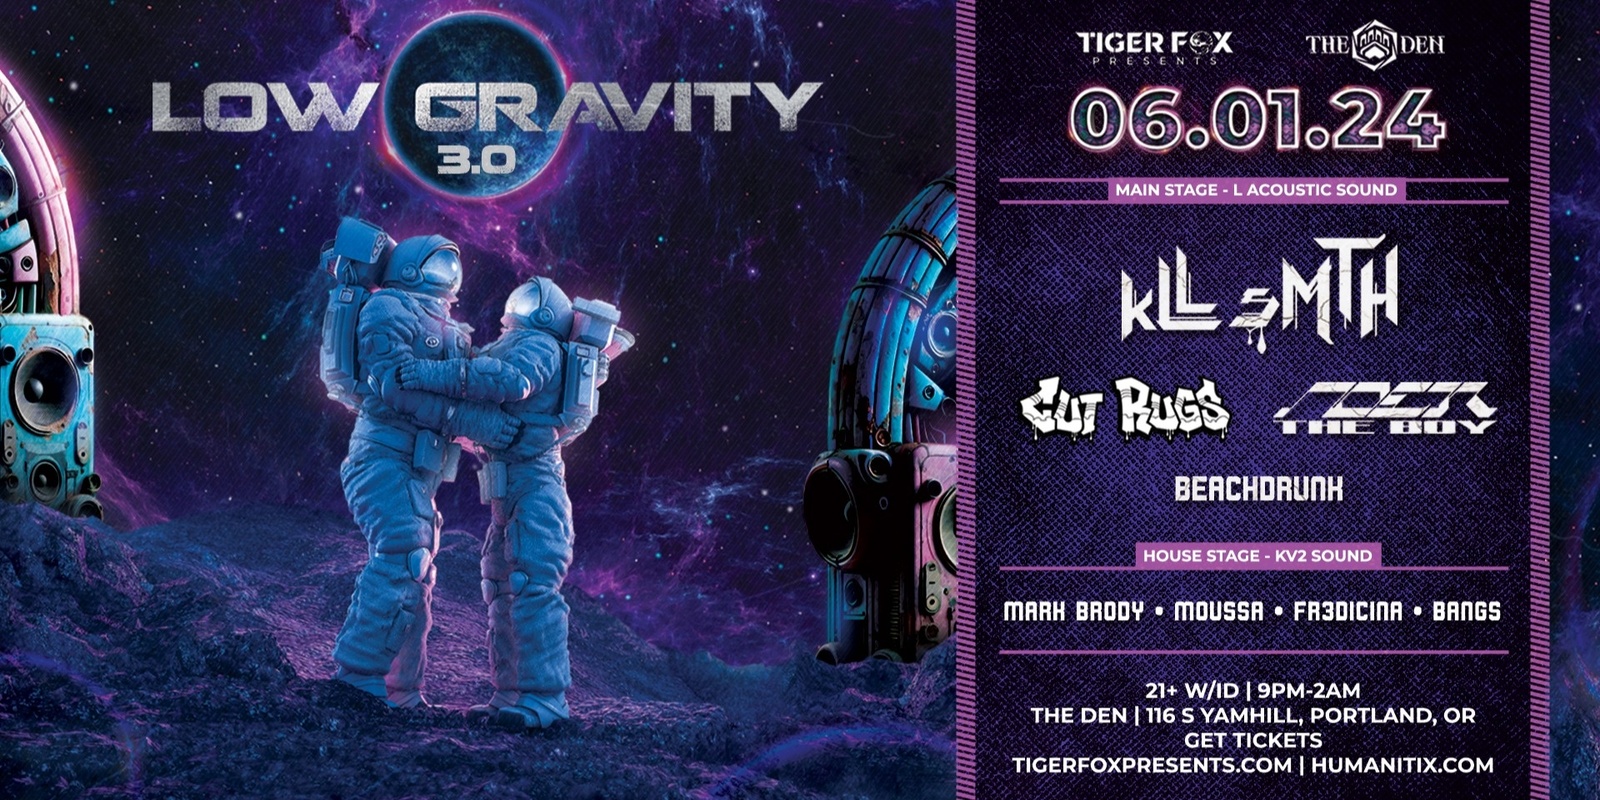 Banner image for LOW GRAVITY 3.0 • kLL sMTH, Cut Rugs, Noer The Boy + MORE • The Den Portland, OR.   